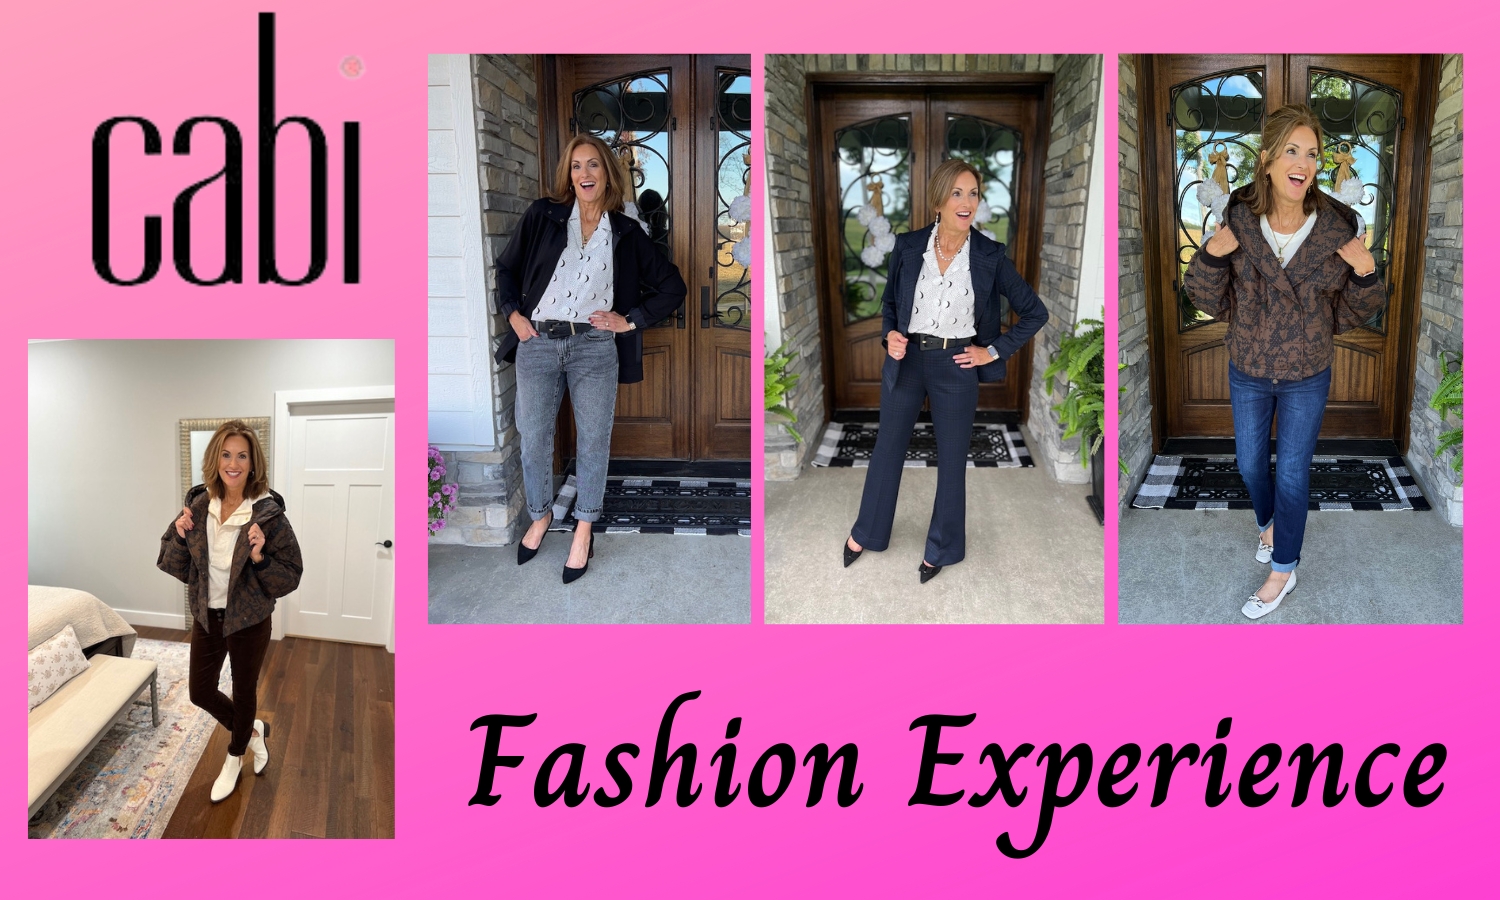 You are currently viewing A Fun cabi Fashion Experience